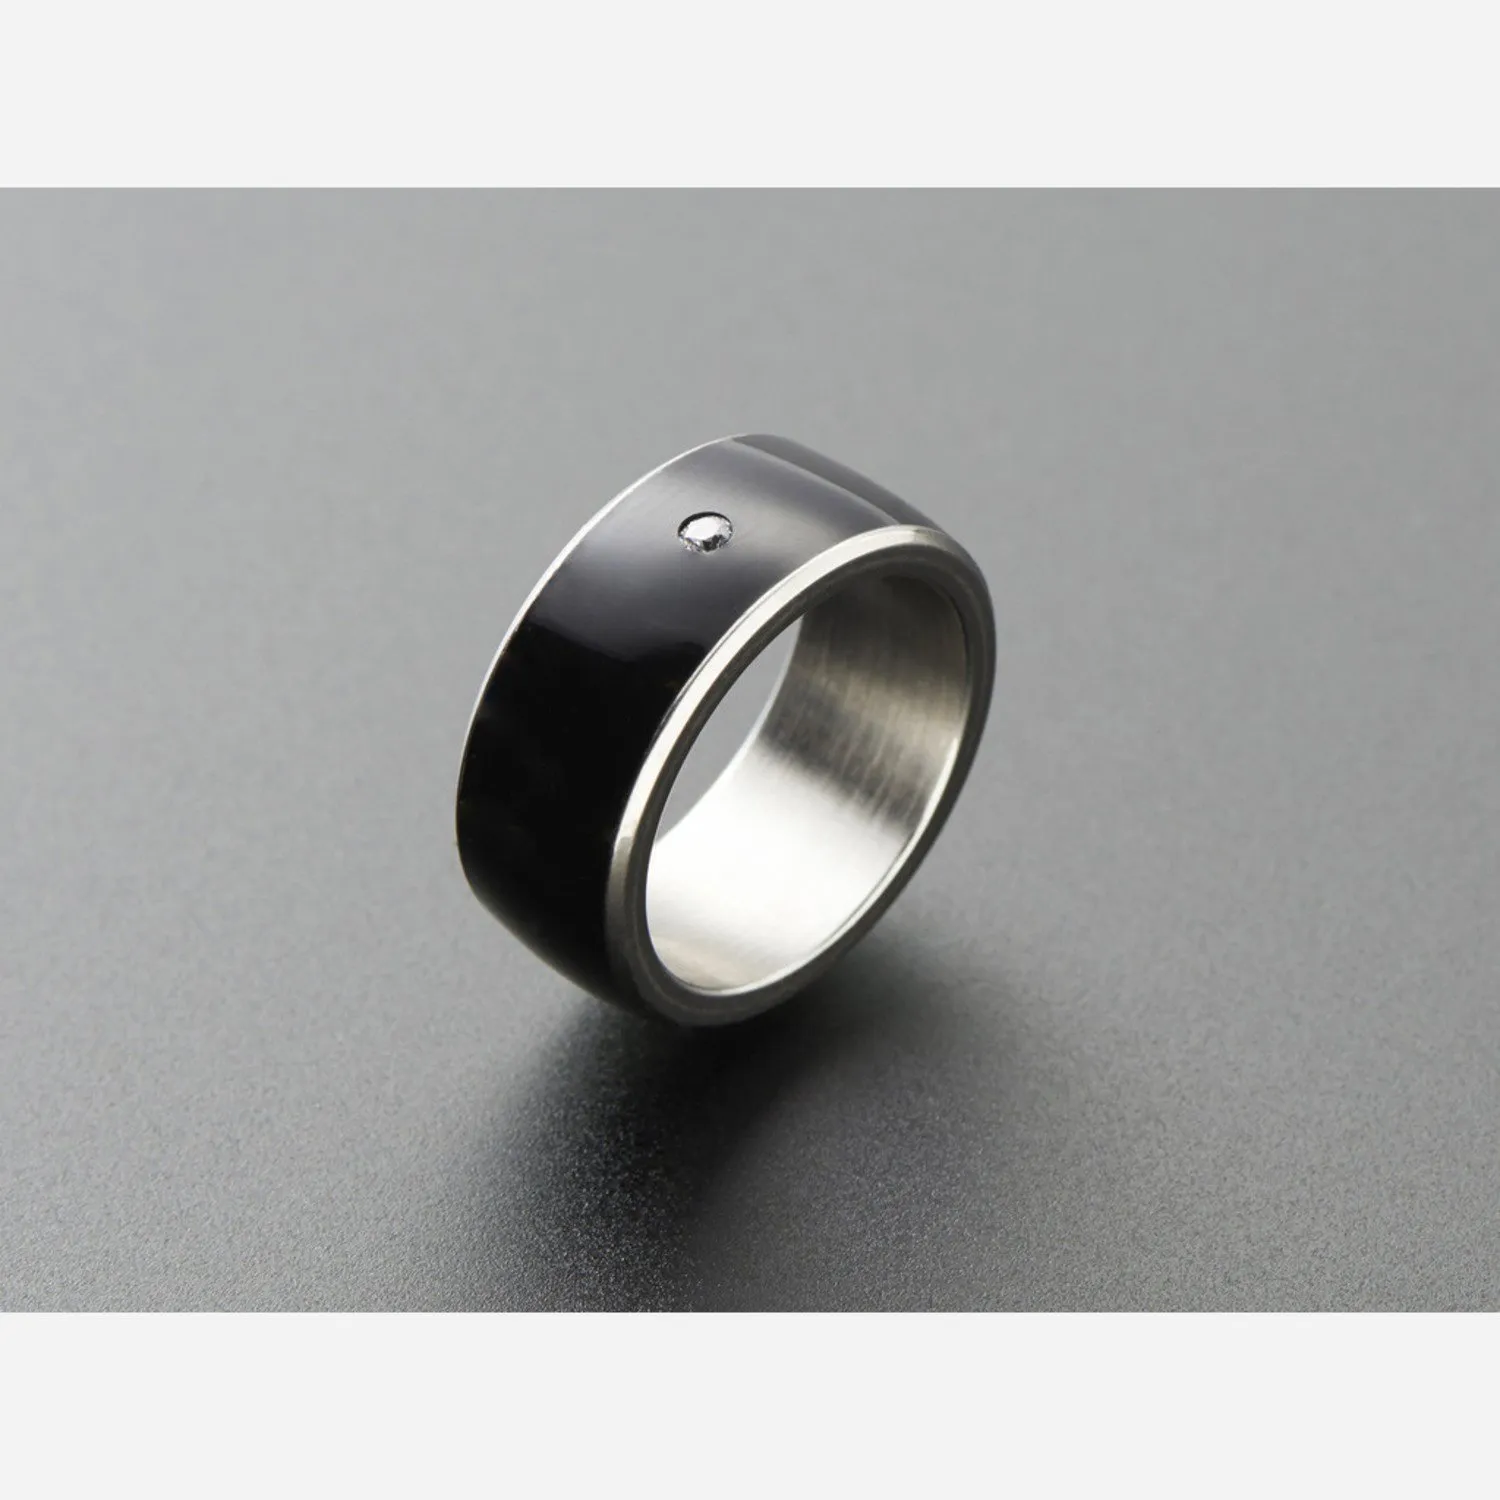 Photo of RFID / NFC Smart Ring - Size 7 - NTAG213